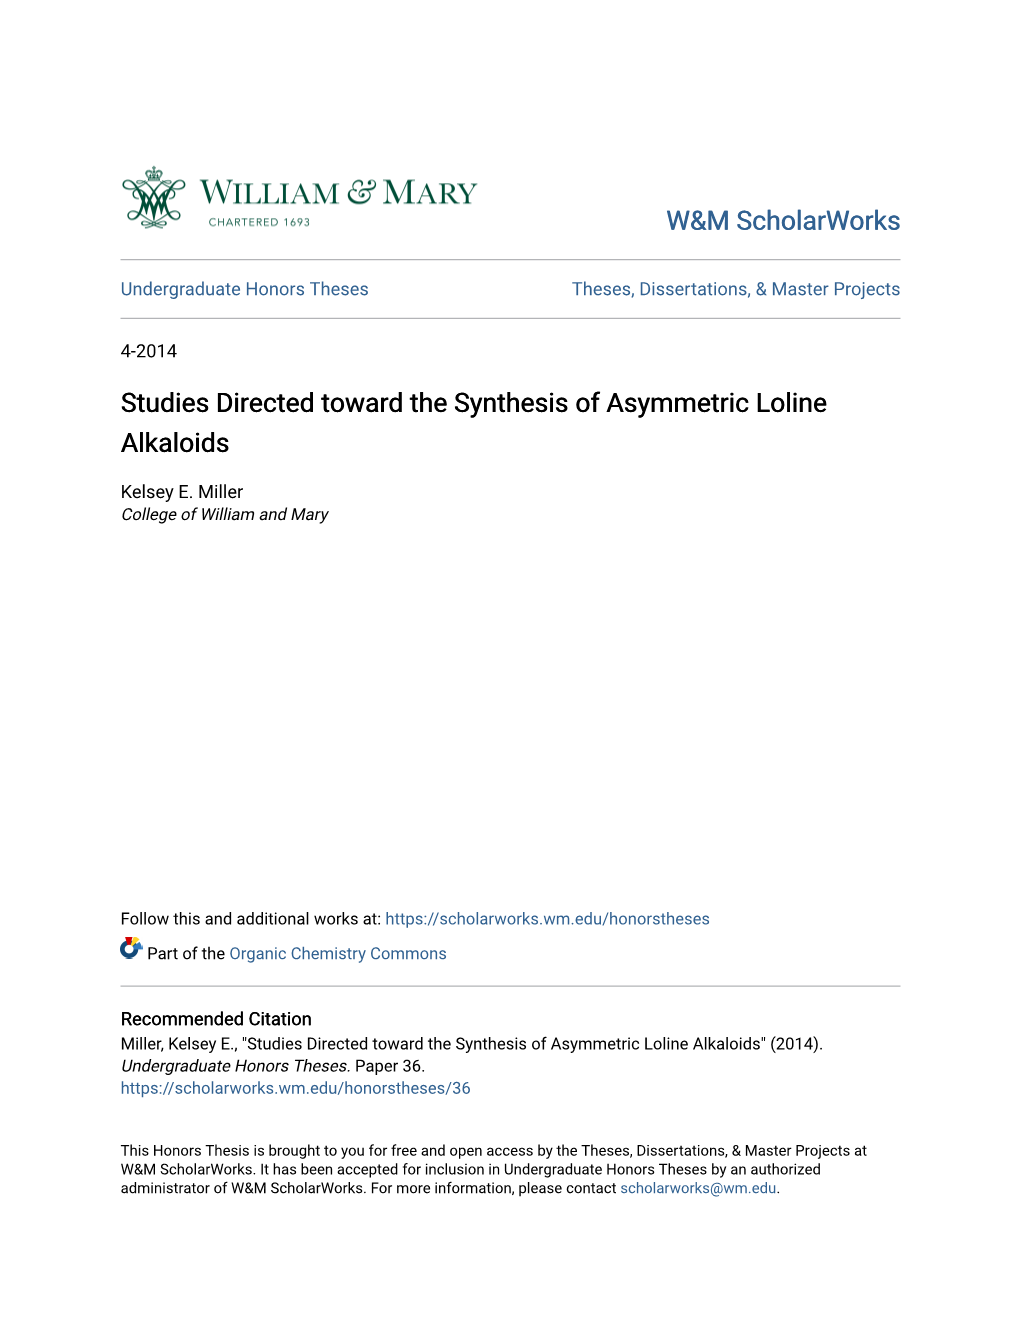 Studies Directed Toward the Synthesis of Asymmetric Loline Alkaloids